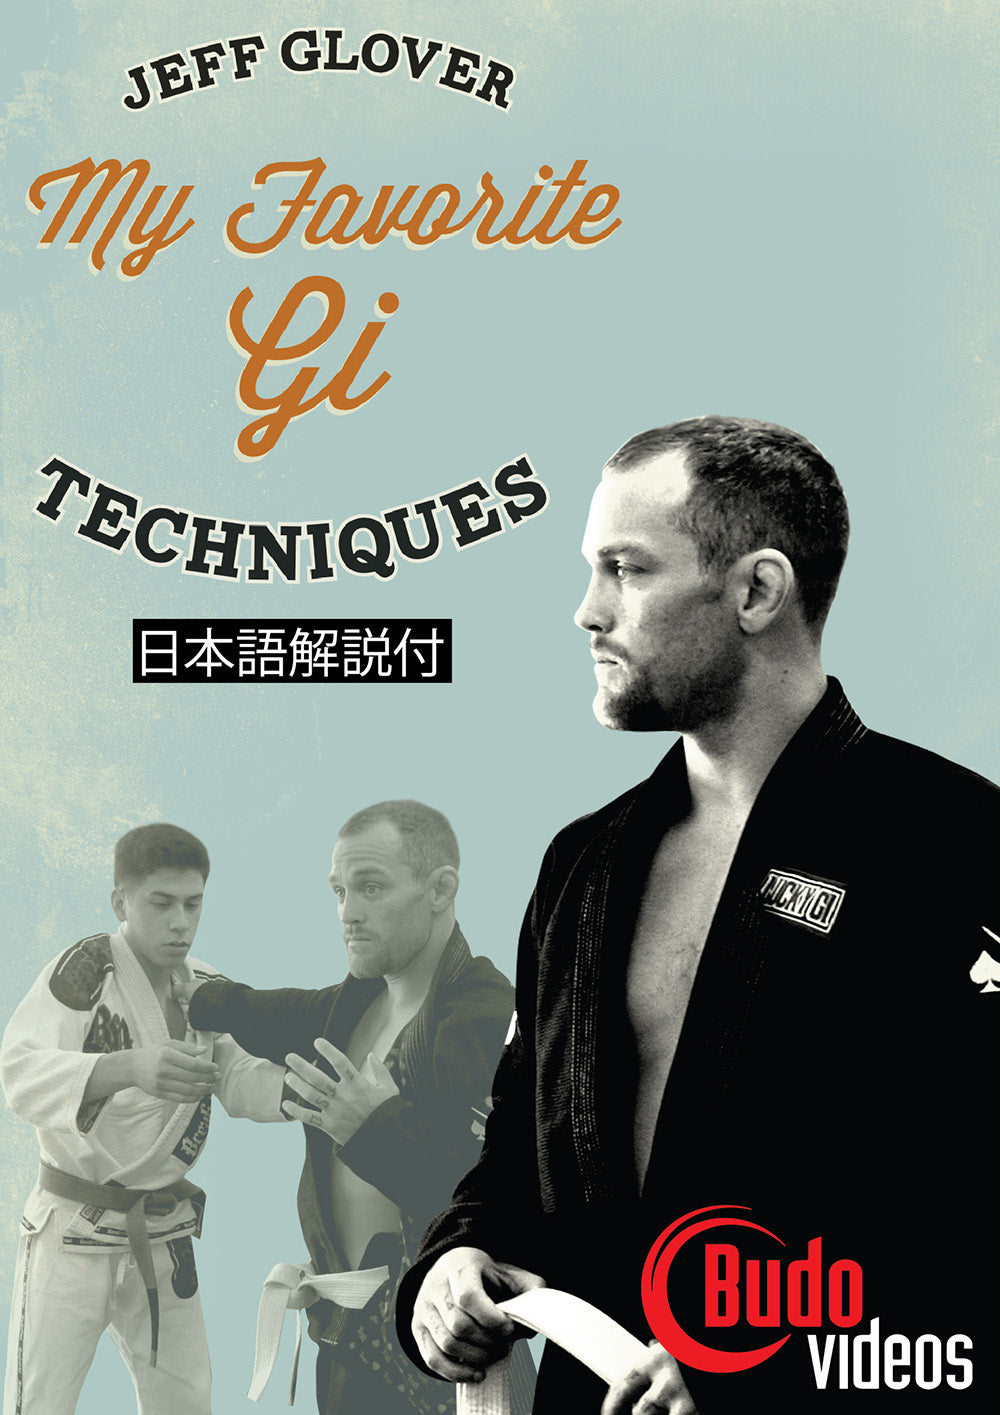 My Favorite Gi Techniques DVD or Blu-ray by Jeff Glover - Budovideos Inc